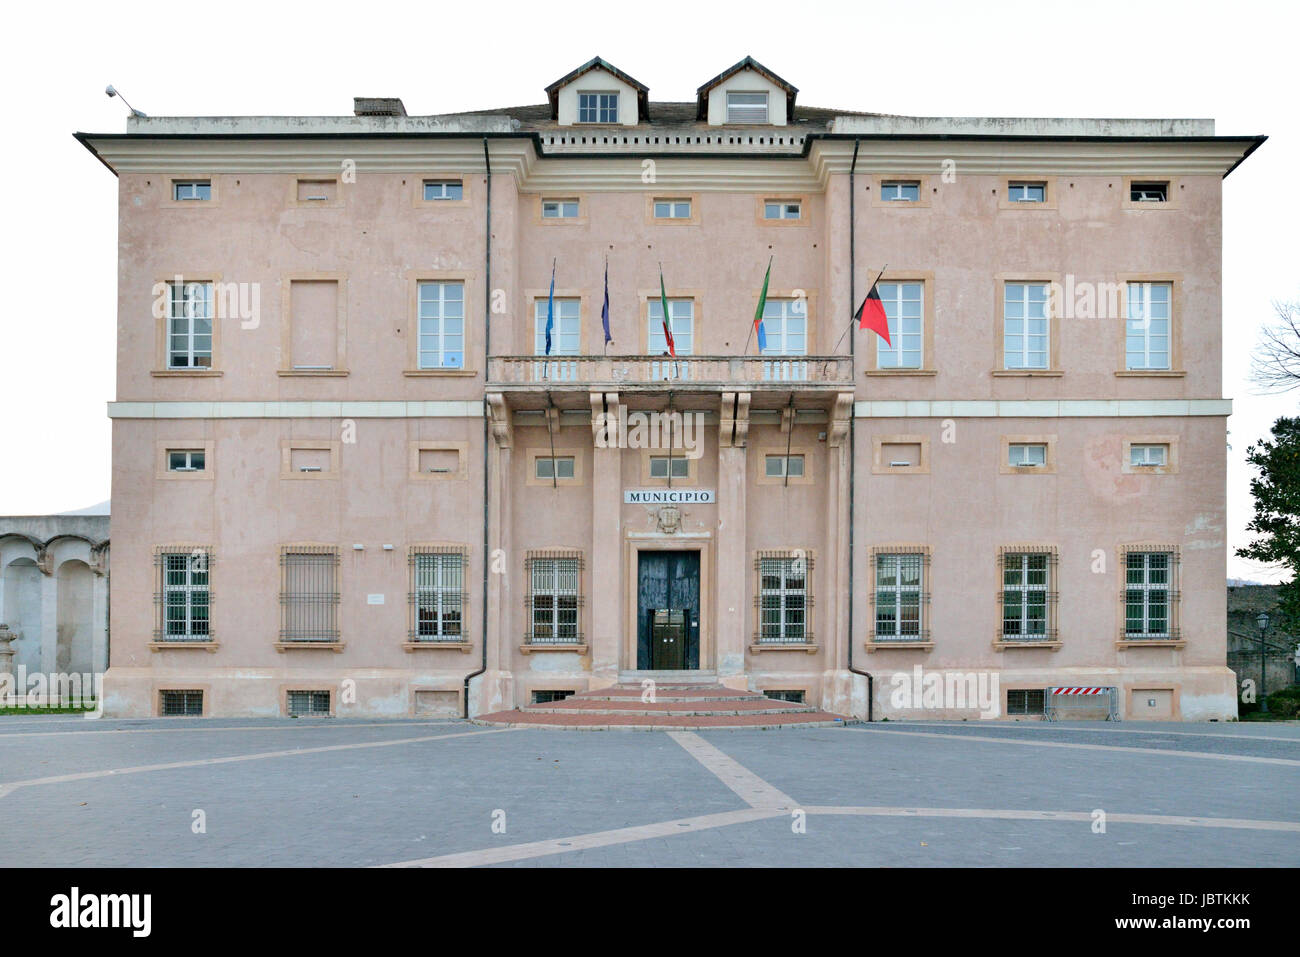 Loano town hall front view Doria palace Stock Photo